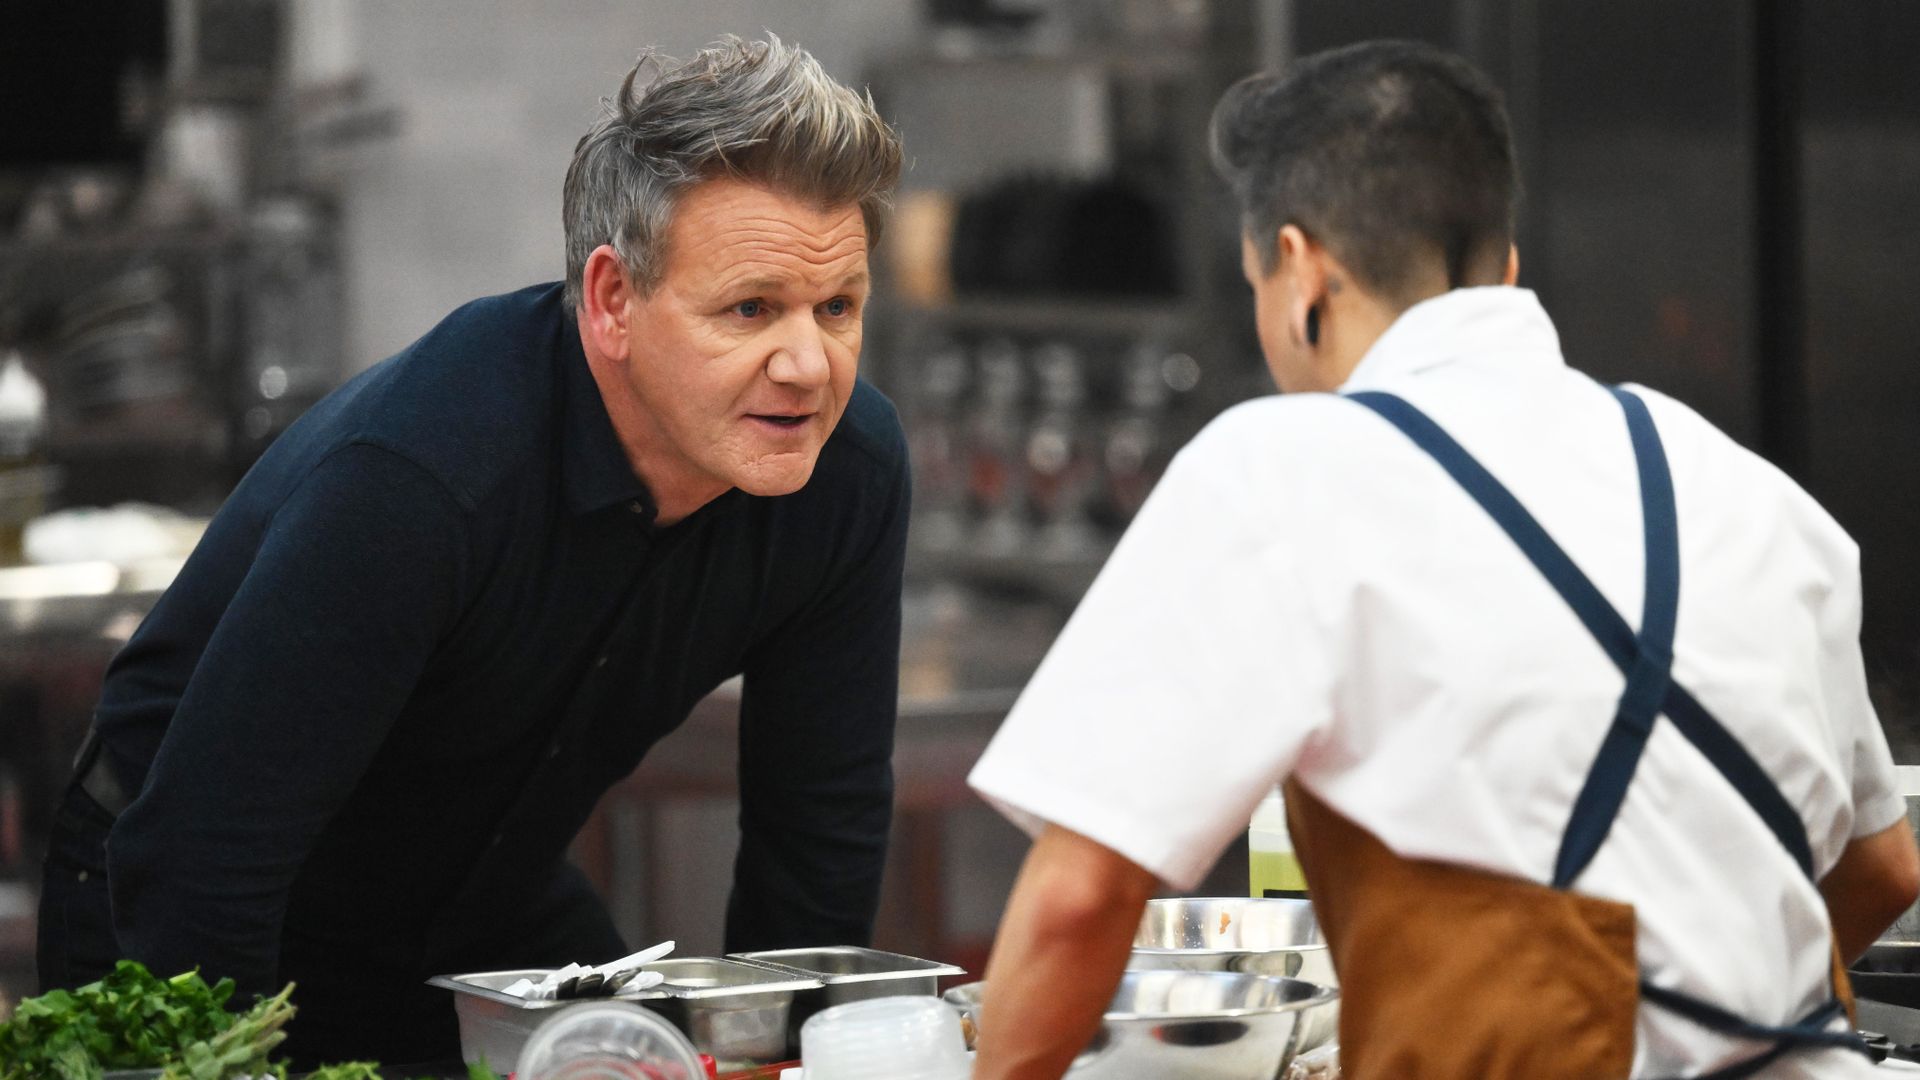 Gordon Ramsay & animation dominate Fox fall TV schedule What to Watch